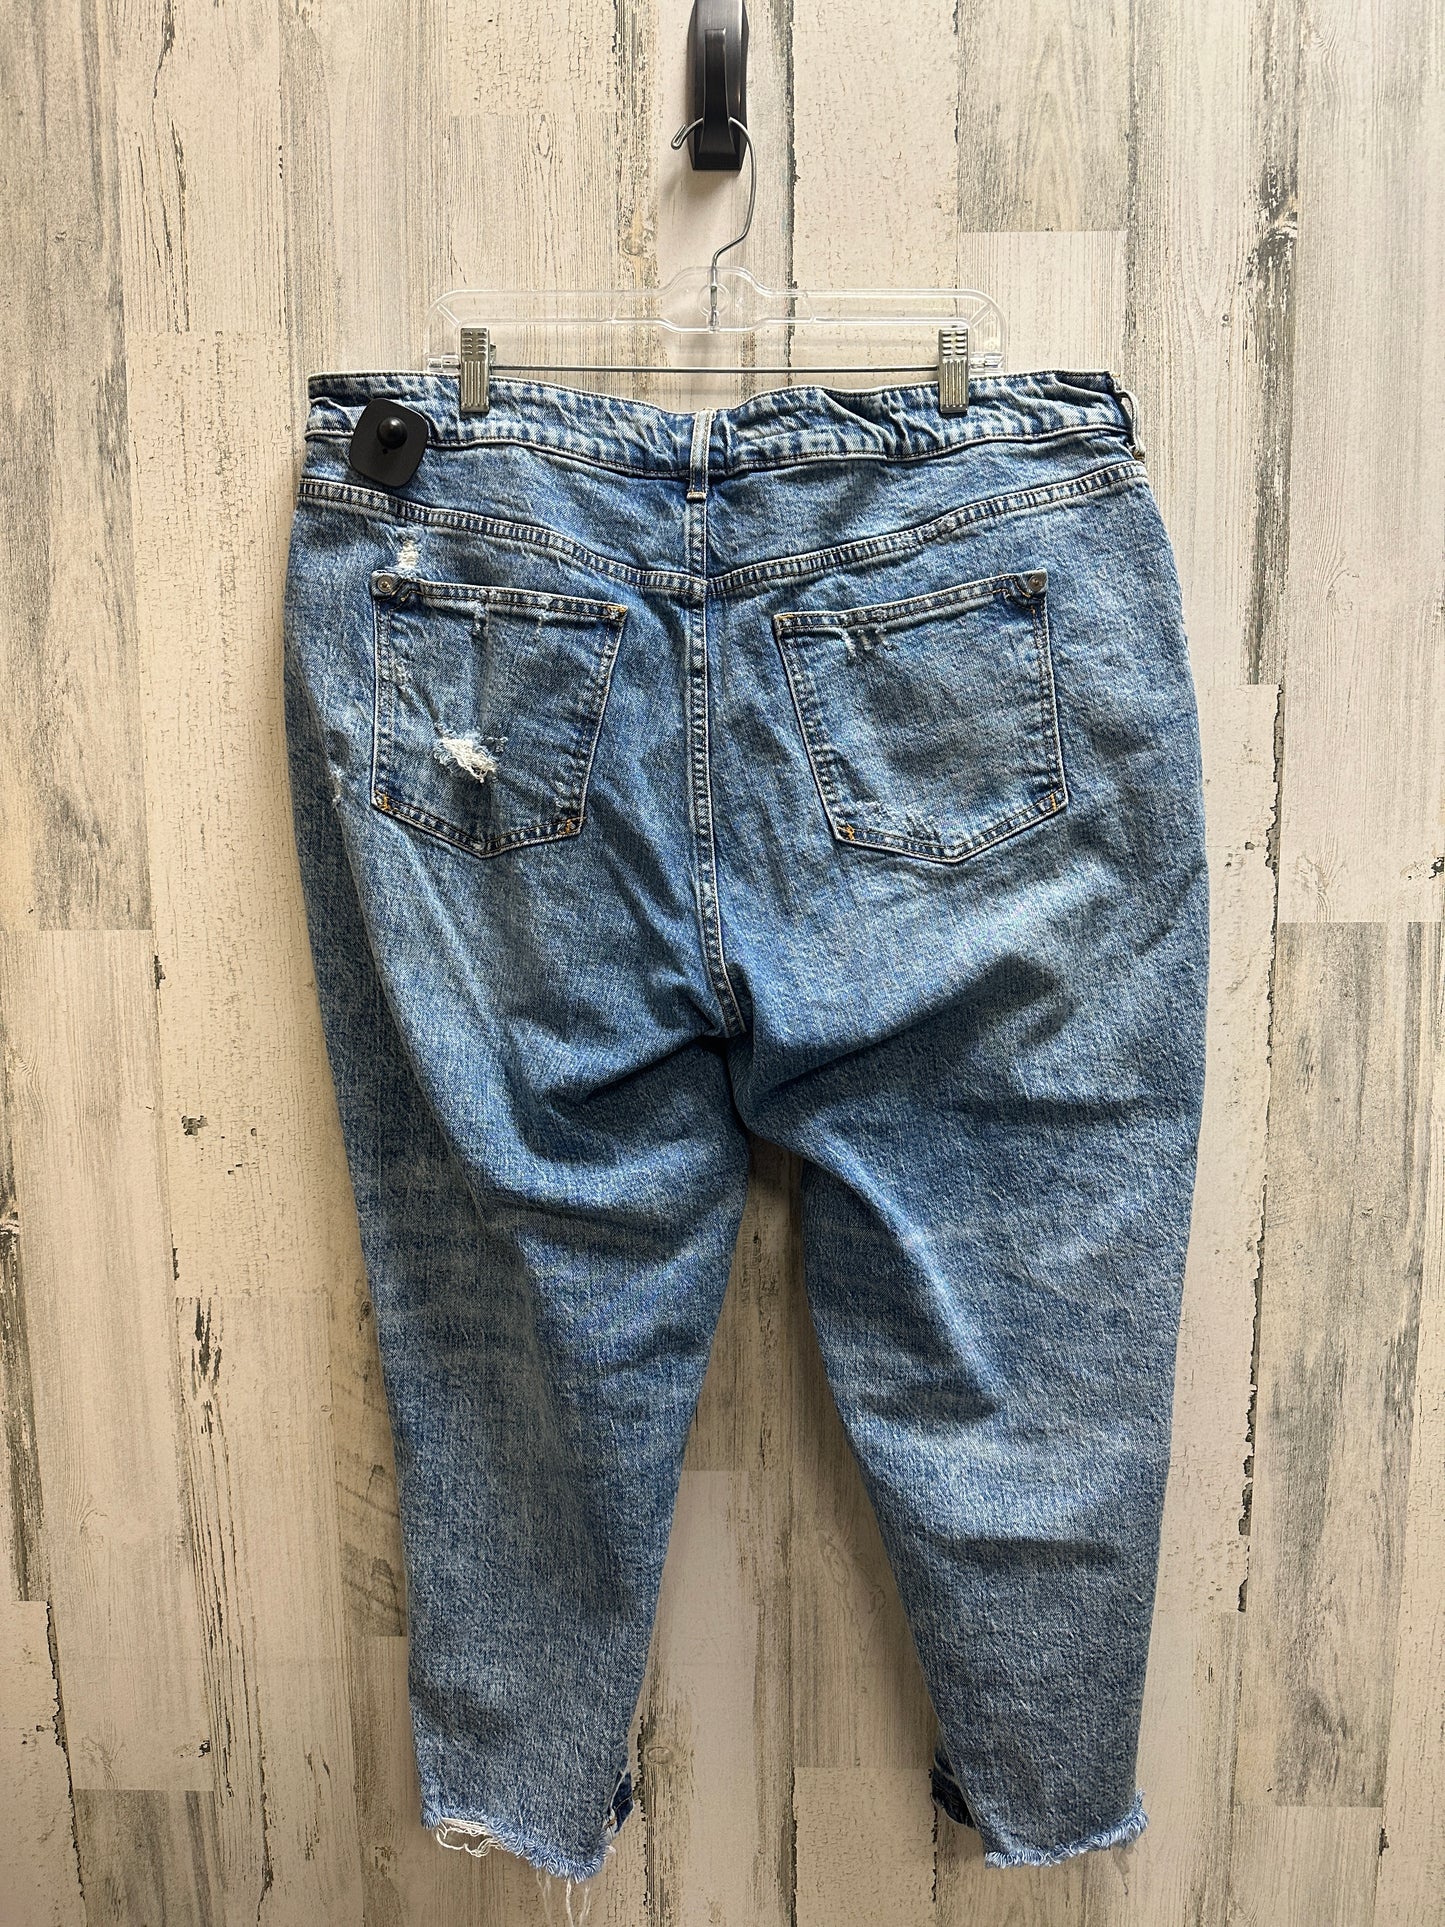 Jeans Relaxed/boyfriend By Anthropologie  Size: 18